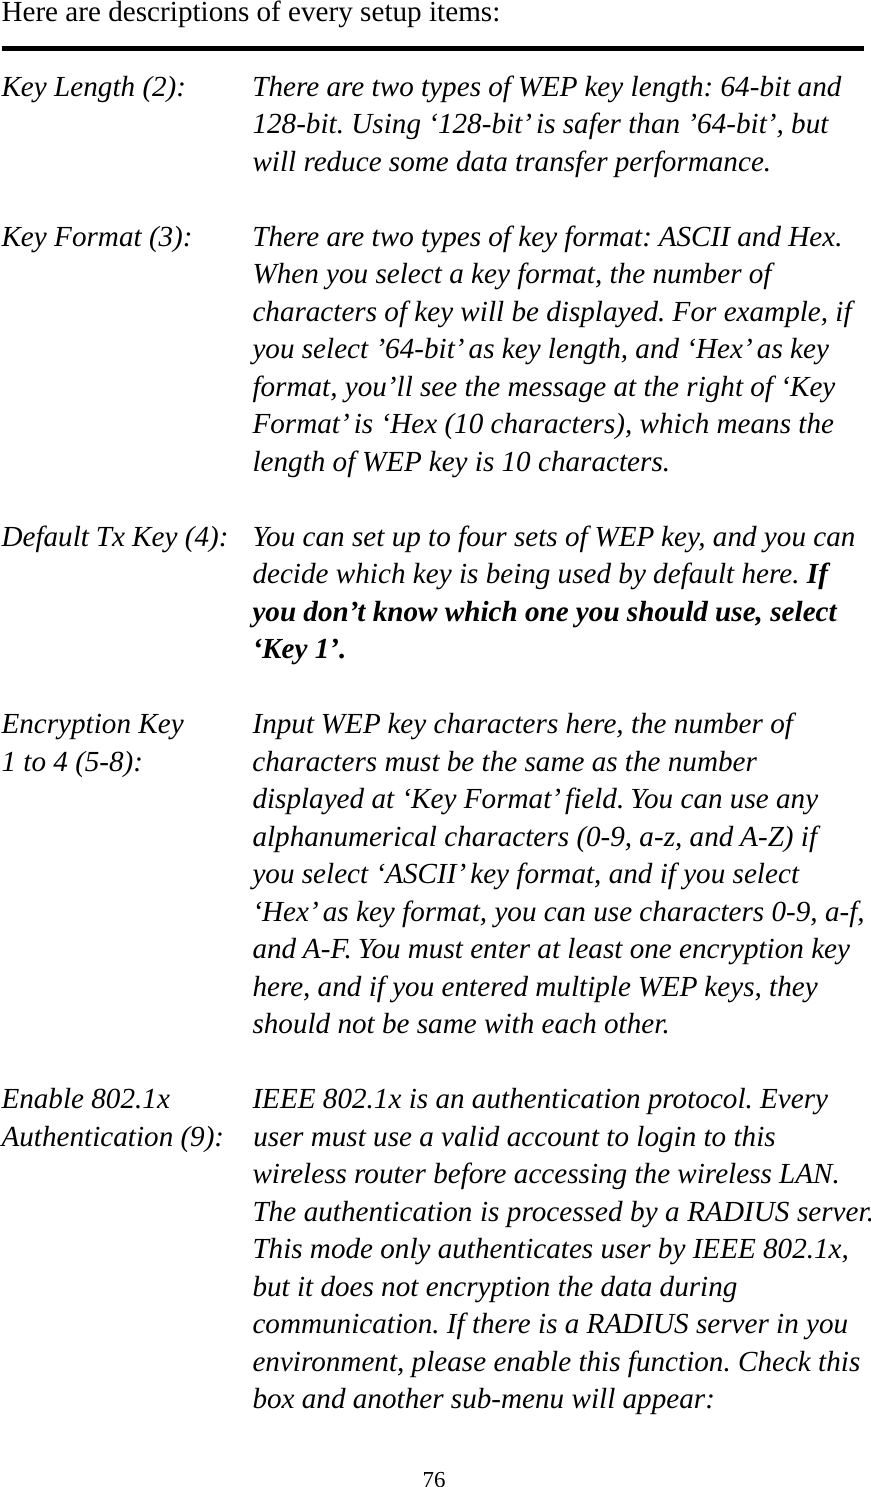 76 Here are descriptions of every setup items:  Key Length (2):    There are two types of WEP key length: 64-bit and 128-bit. Using ‘128-bit’ is safer than ’64-bit’, but will reduce some data transfer performance.  Key Format (3):    There are two types of key format: ASCII and Hex. When you select a key format, the number of characters of key will be displayed. For example, if you select ’64-bit’ as key length, and ‘Hex’ as key format, you’ll see the message at the right of ‘Key Format’ is ‘Hex (10 characters), which means the length of WEP key is 10 characters.  Default Tx Key (4):   You can set up to four sets of WEP key, and you can decide which key is being used by default here. If you don’t know which one you should use, select ‘Key 1’.  Encryption Key     Input WEP key characters here, the number of 1 to 4 (5-8):    characters must be the same as the number displayed at ‘Key Format’ field. You can use any alphanumerical characters (0-9, a-z, and A-Z) if you select ‘ASCII’ key format, and if you select ‘Hex’ as key format, you can use characters 0-9, a-f, and A-F. You must enter at least one encryption key here, and if you entered multiple WEP keys, they should not be same with each other.  Enable 802.1x  IEEE 802.1x is an authentication protocol. Every   Authentication (9):    user must use a valid account to login to this wireless router before accessing the wireless LAN. The authentication is processed by a RADIUS server. This mode only authenticates user by IEEE 802.1x, but it does not encryption the data during communication. If there is a RADIUS server in you environment, please enable this function. Check this box and another sub-menu will appear: 